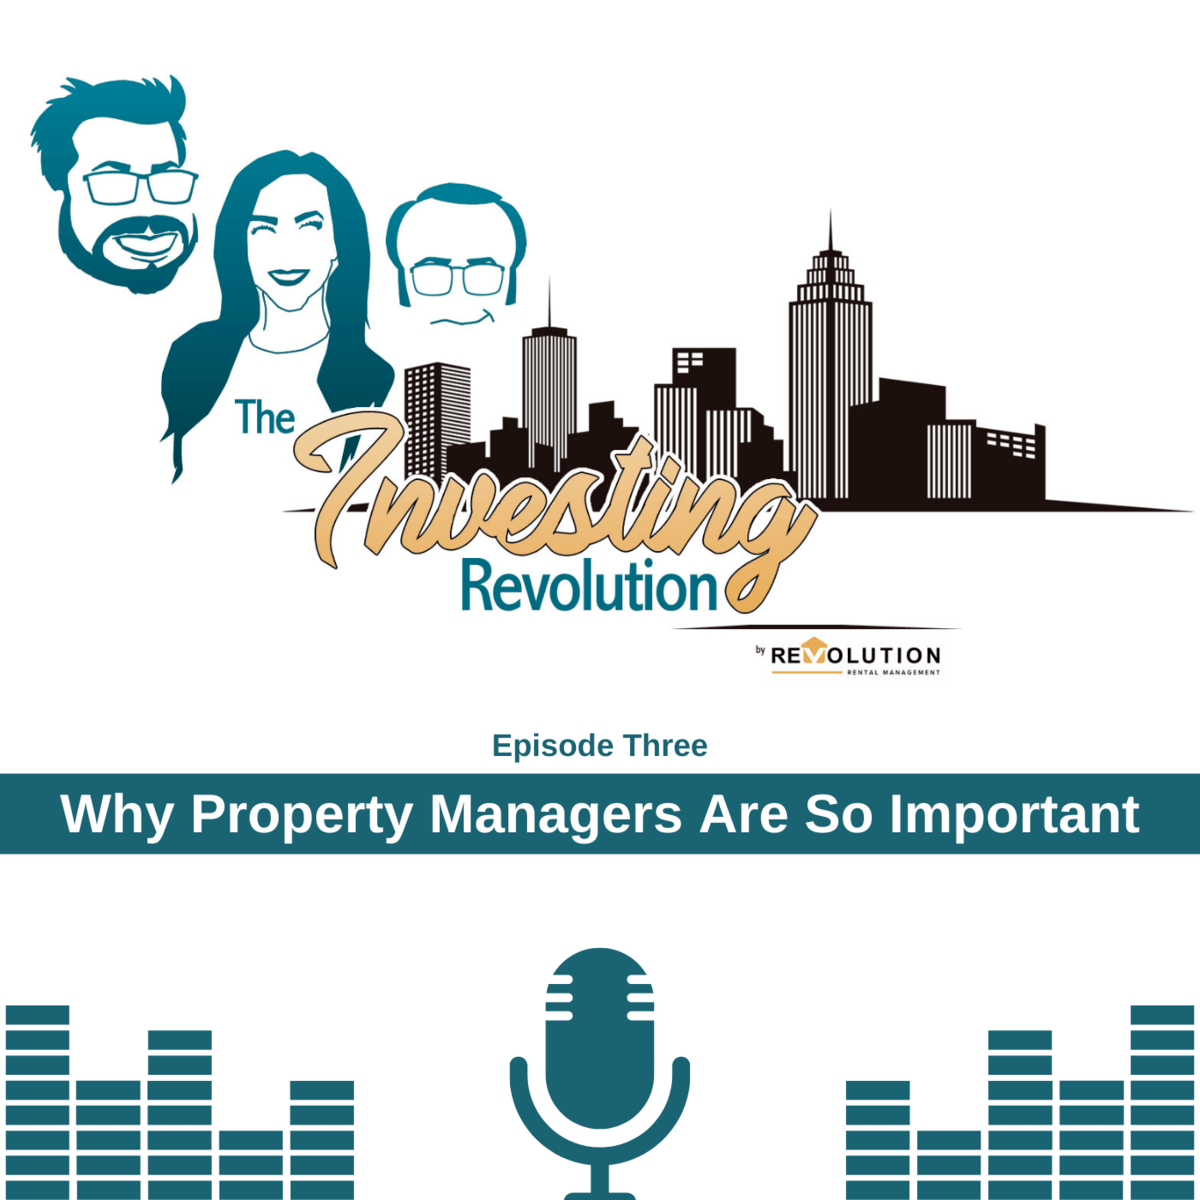 Why Property Managers Are So Important